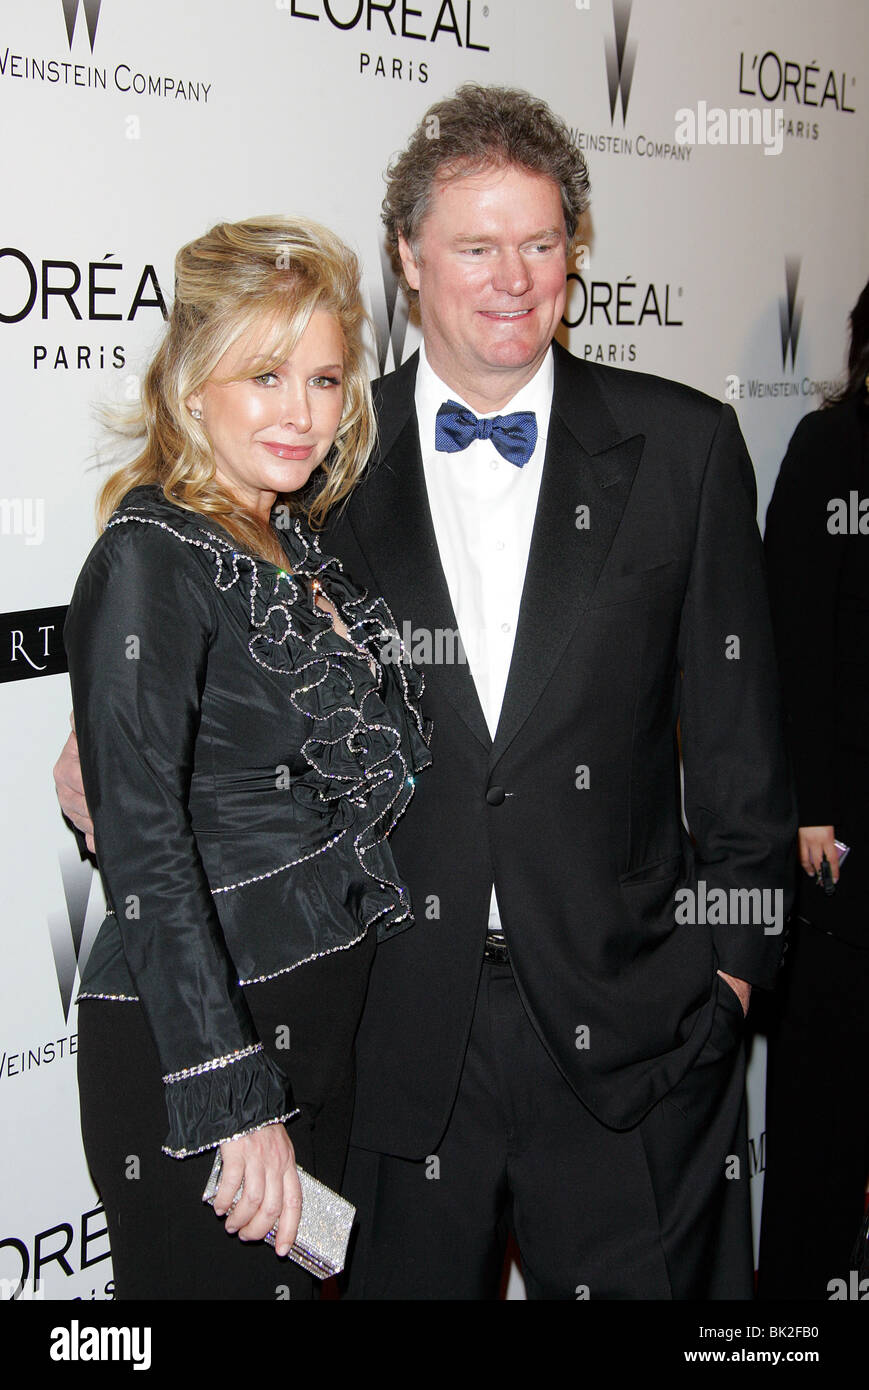 KATHY HILTON & RICK HILTON THE WEINSTEIN COMPANYS 2007 GOLDEN GLOBES AFTER PARTY BEVERLY HILLS HOTEL BEVERLY HILLS LOS ANGELES Stock Photo